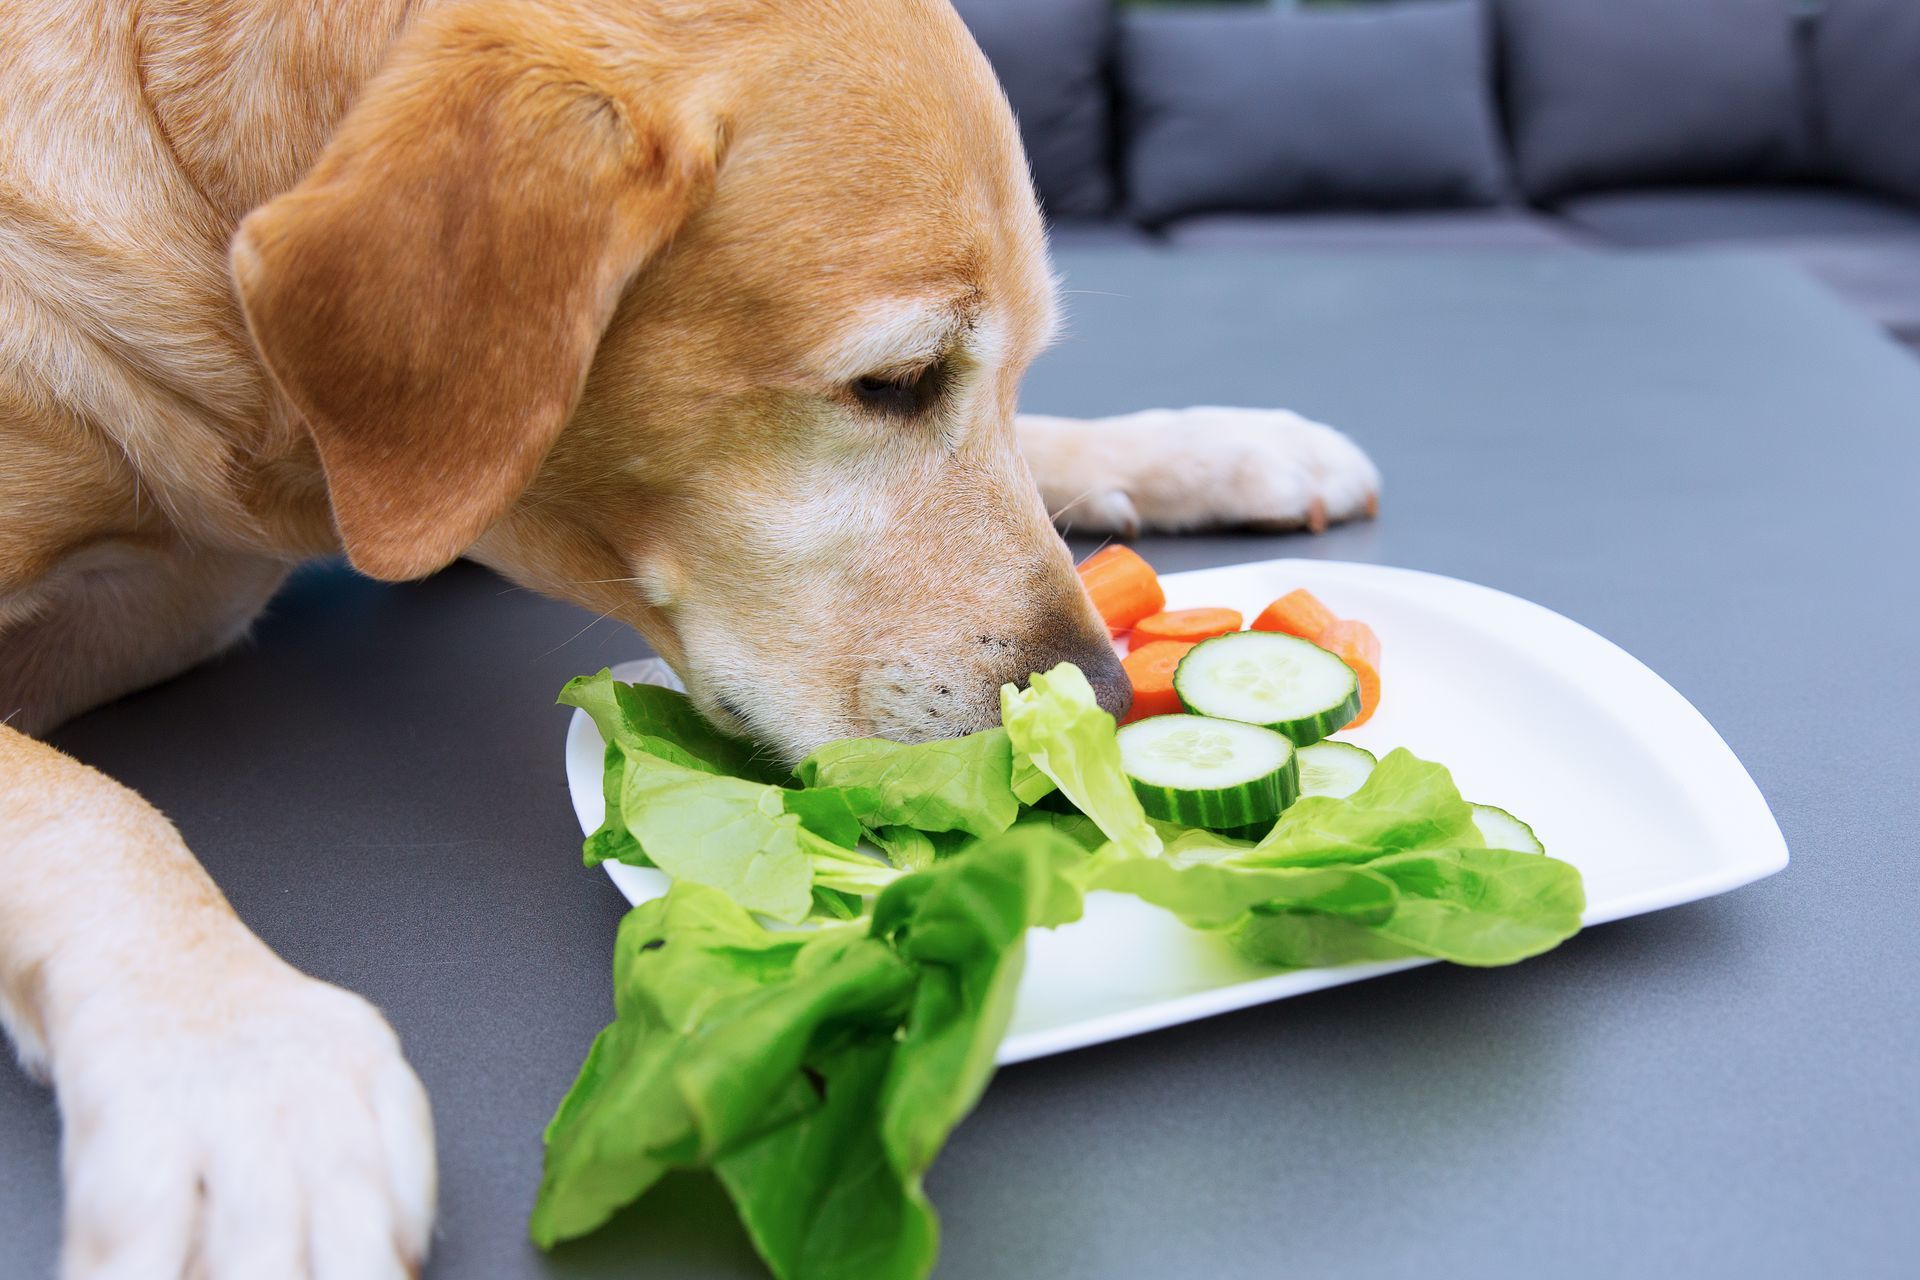 Discover the top 7 vegetables dogs can eat! From carrots to sweet potatoes, ensure your pup's diet i